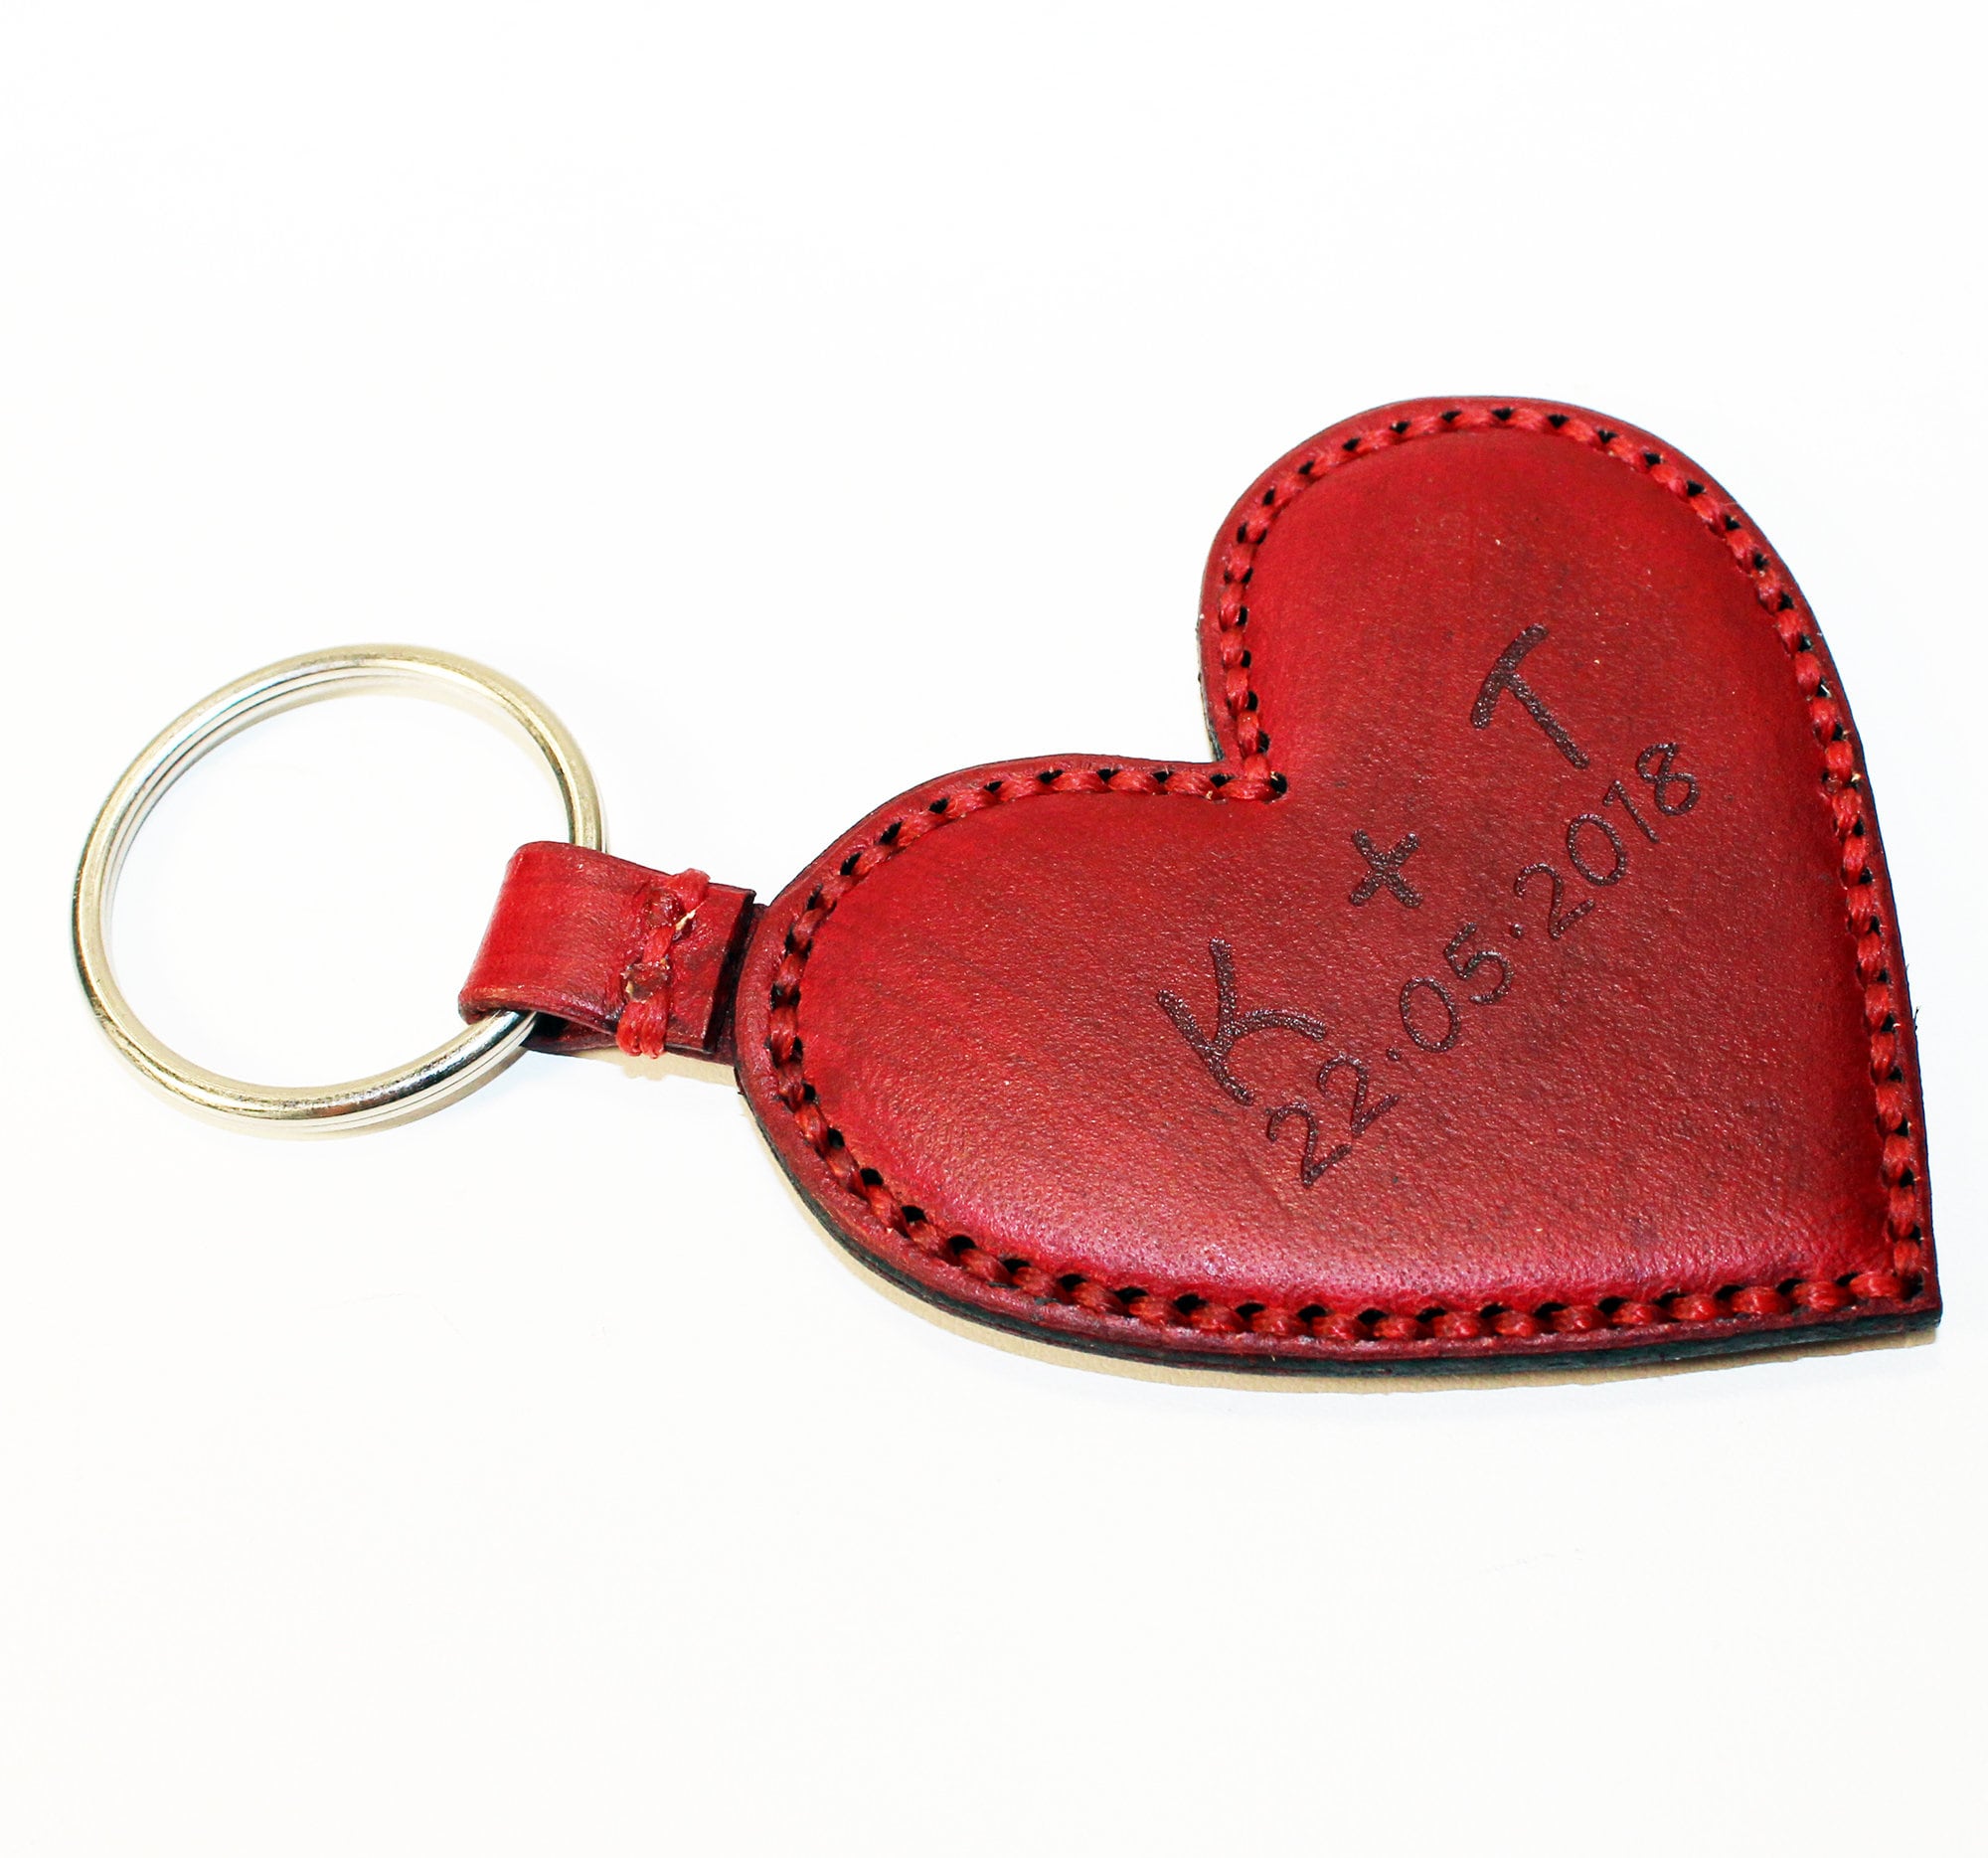 MOM DAY GIFT WIFE RED HEART KEYCHAIN KEY CHAIN PURSE BADGE HOLDER